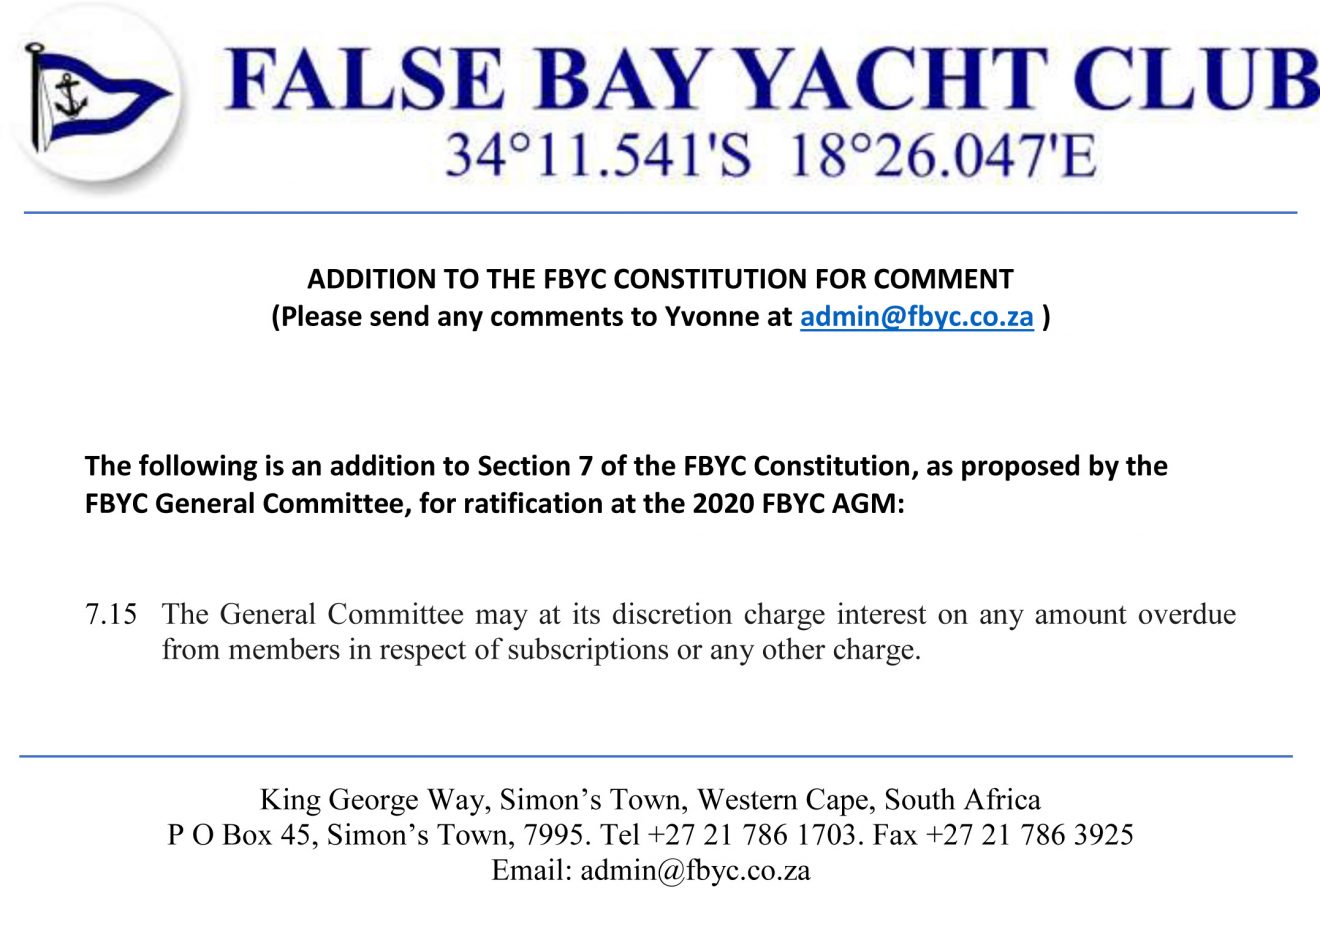 FBYC Constitution addition on letterhead